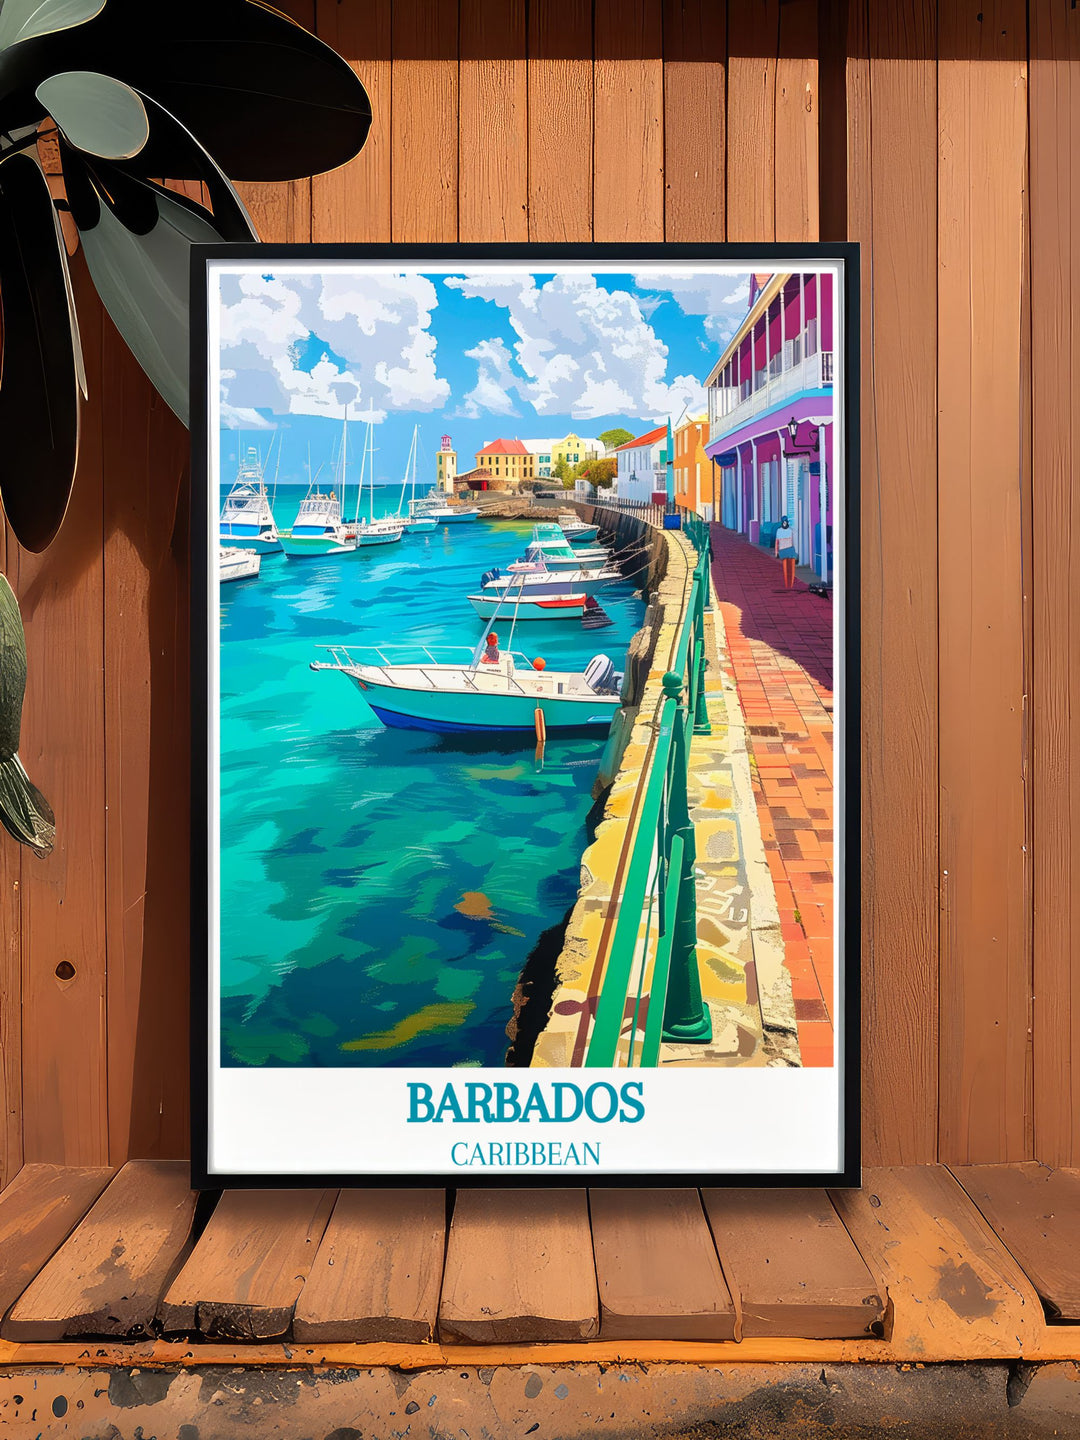 Framed art of Bridgetown Barbados, capturing the vibrant colors and unique architecture of this UNESCO World Heritage site, perfect for enhancing any decor with a touch of Caribbean elegance and history.